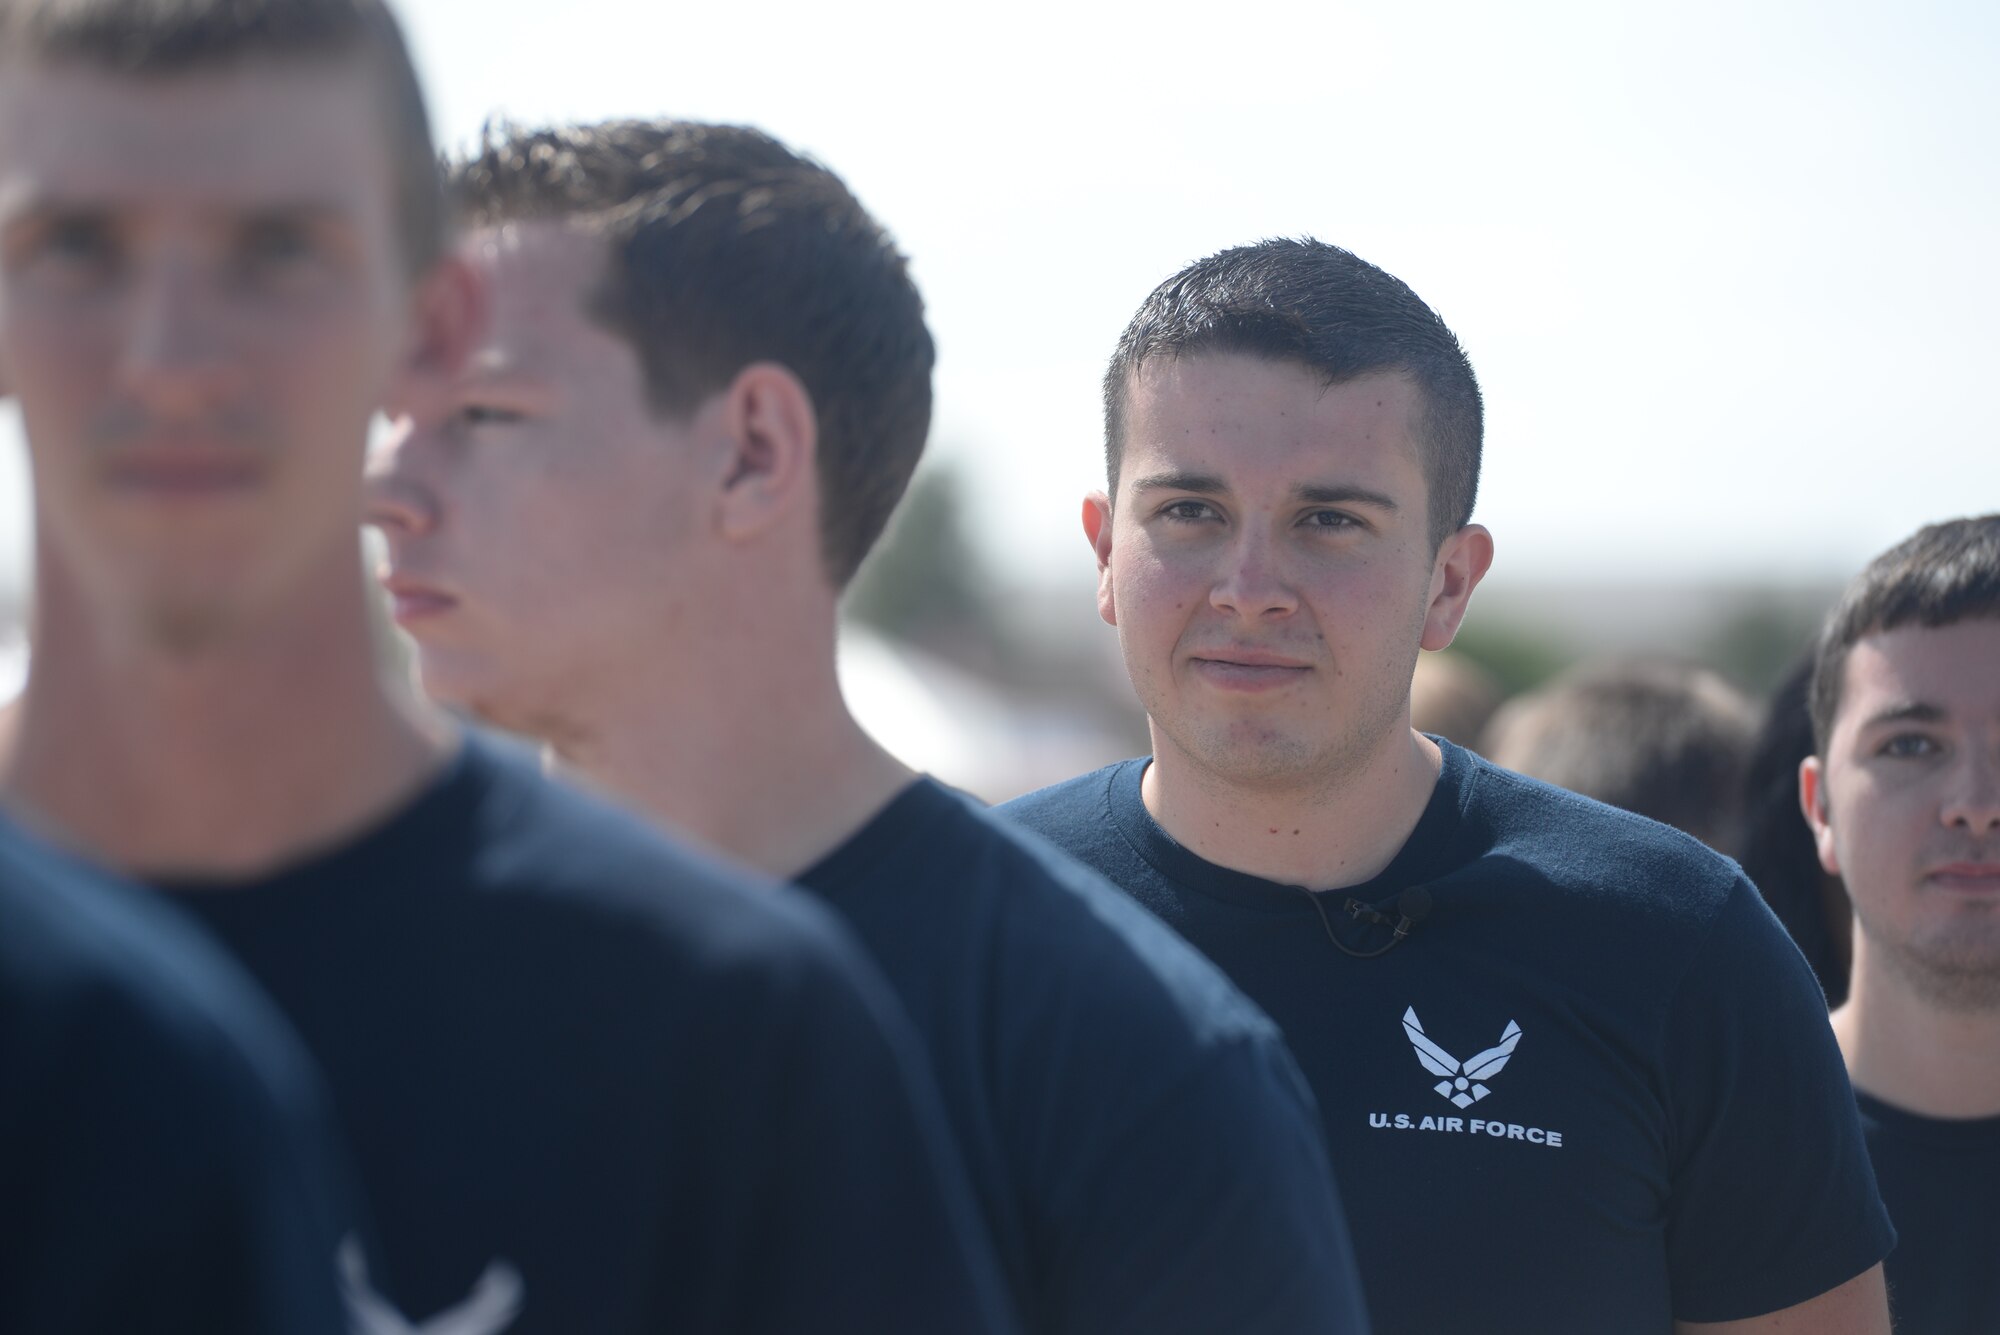 ALTUS AIR FORCE BASE, Okla. – Thomas Farley stands in line waiting to be sworn in at the 2014 Wings of Freedom Open House, Sept. 13, 2014. Thomas and more than 20 other high school graduates began their career in the Air Force by being sworn in by the U.S. Air Force Thunderbirds. (U.S. Air Force photo by Senior Airman Levin Boland/Released)